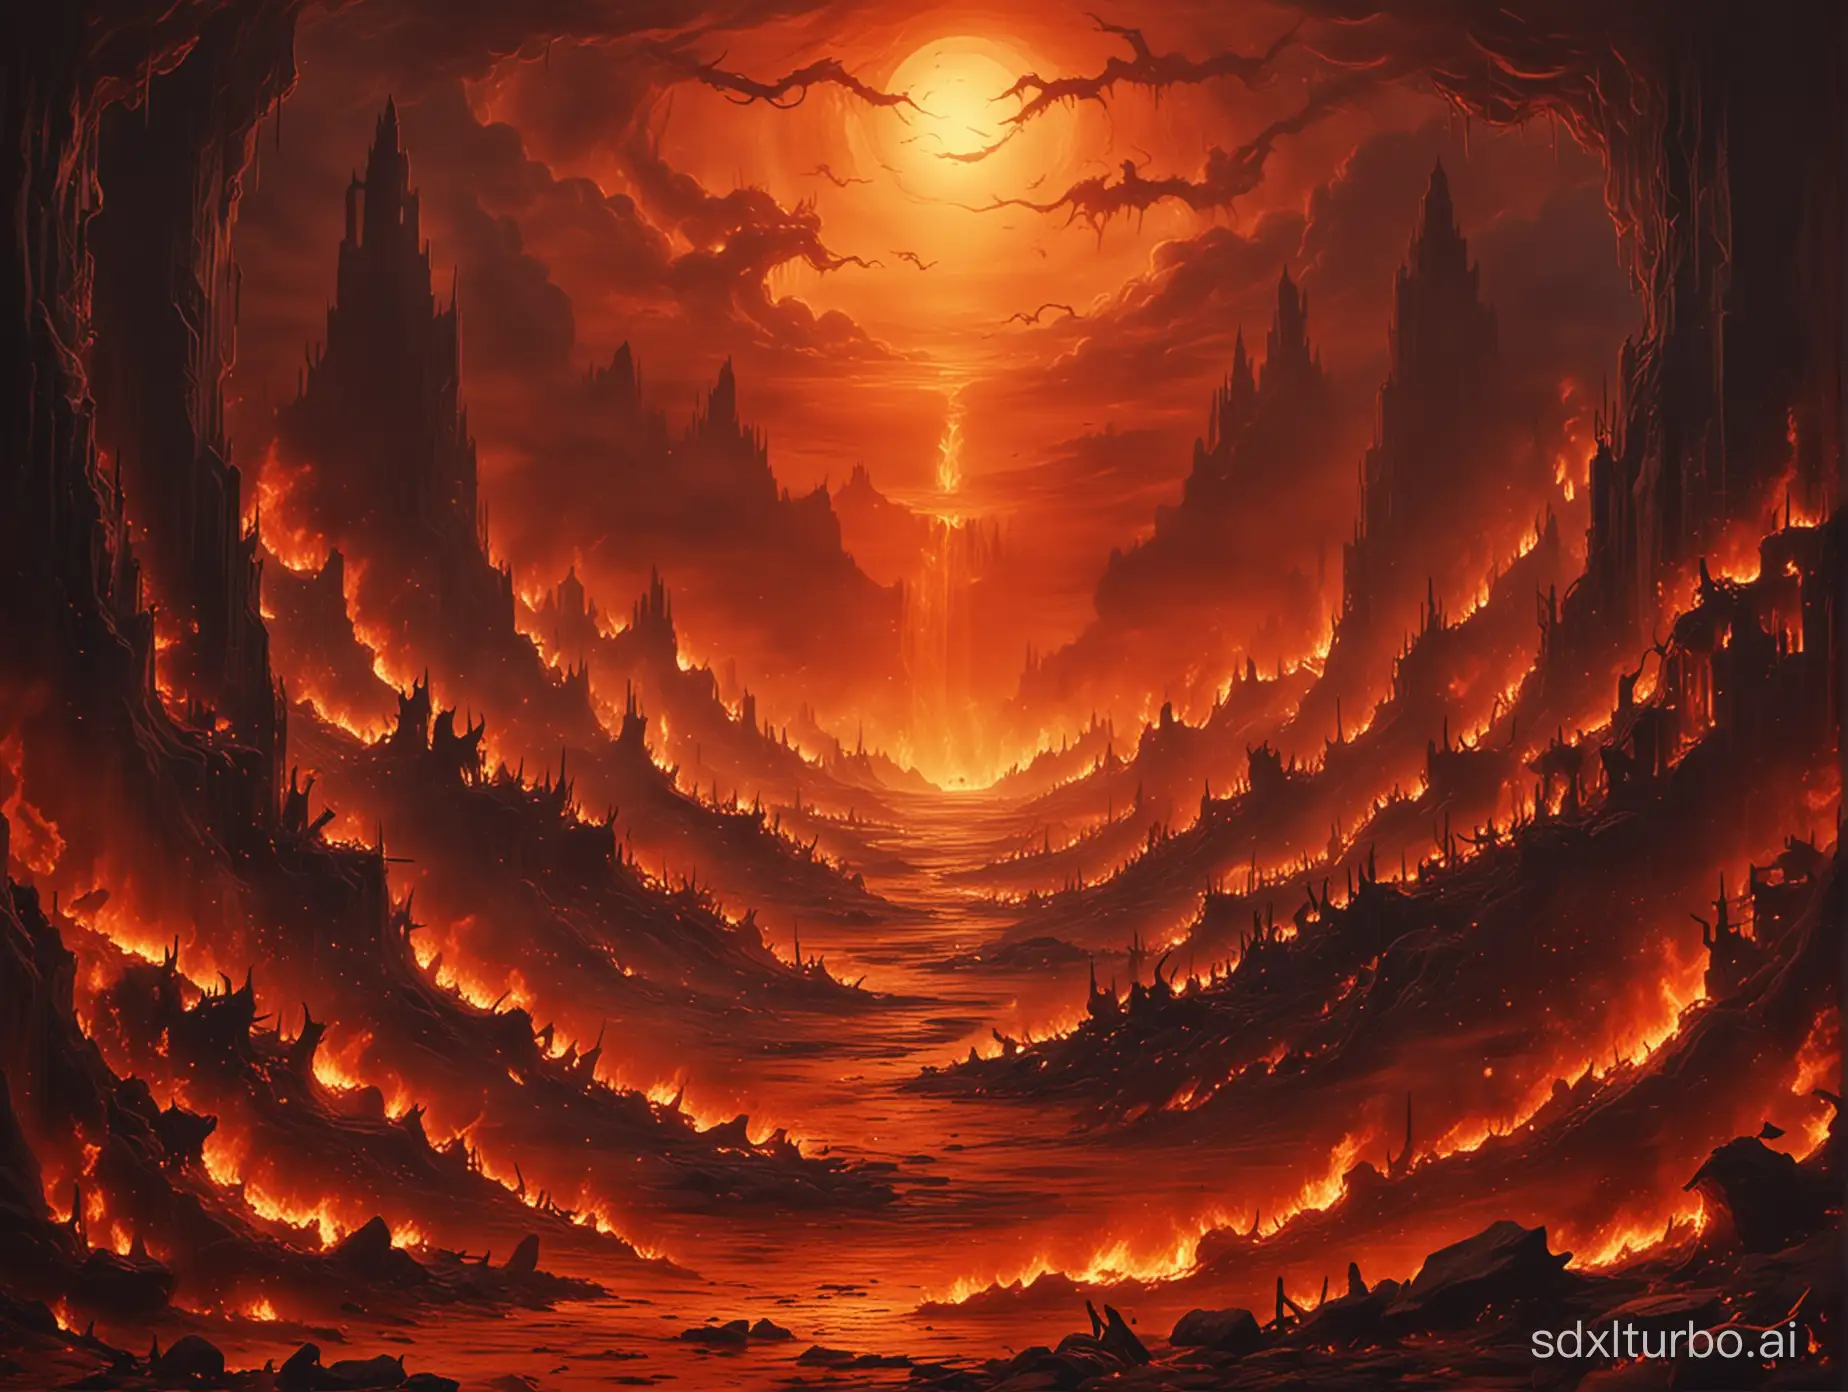  hell 
background 
